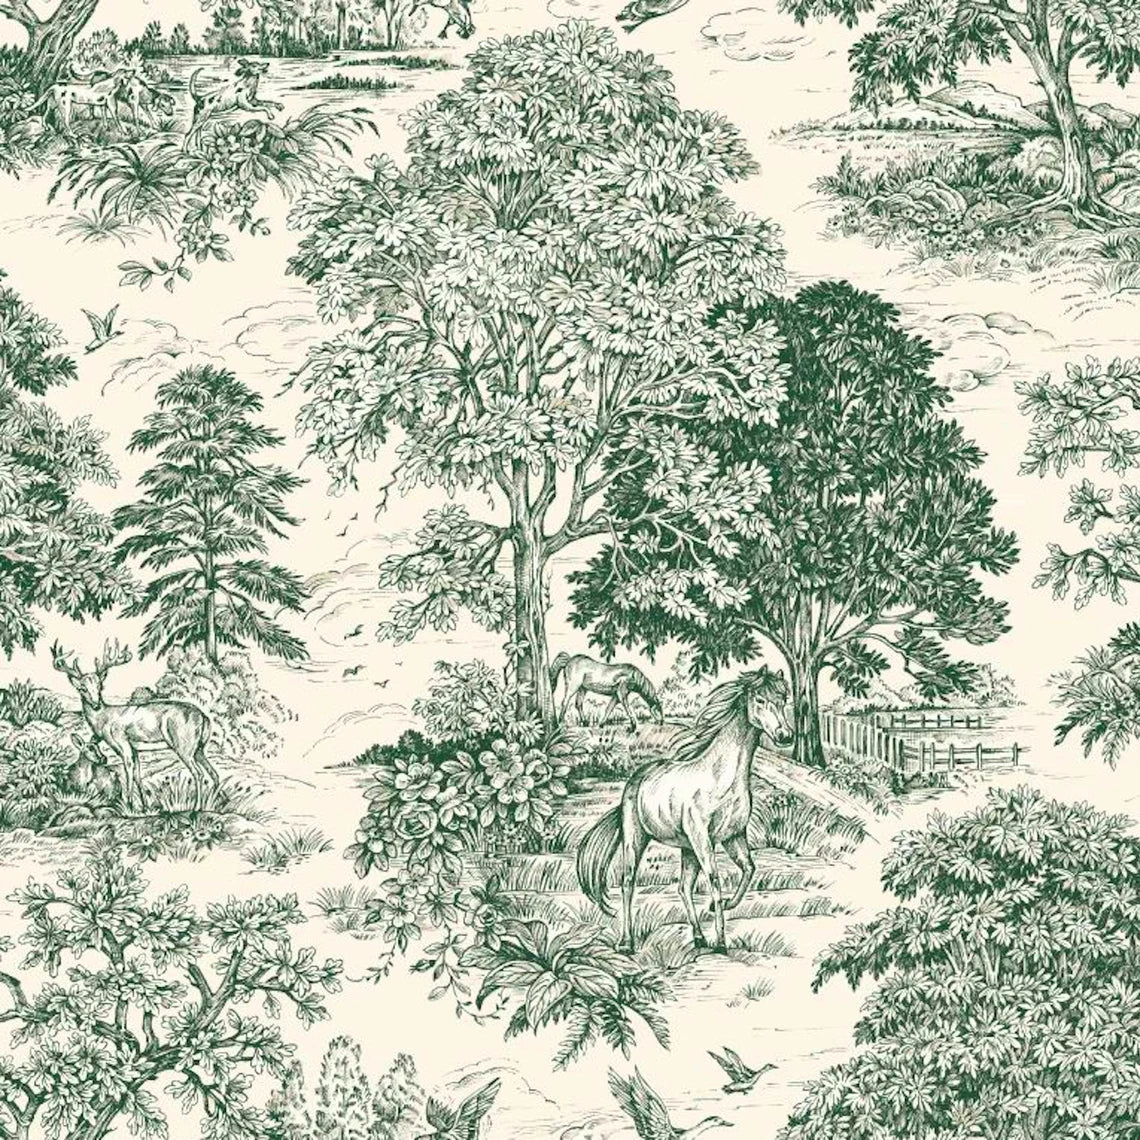 Bed Runner in Yellowstone Classic Green Country Toile- Horses, Deer, Dogs- Large Scale